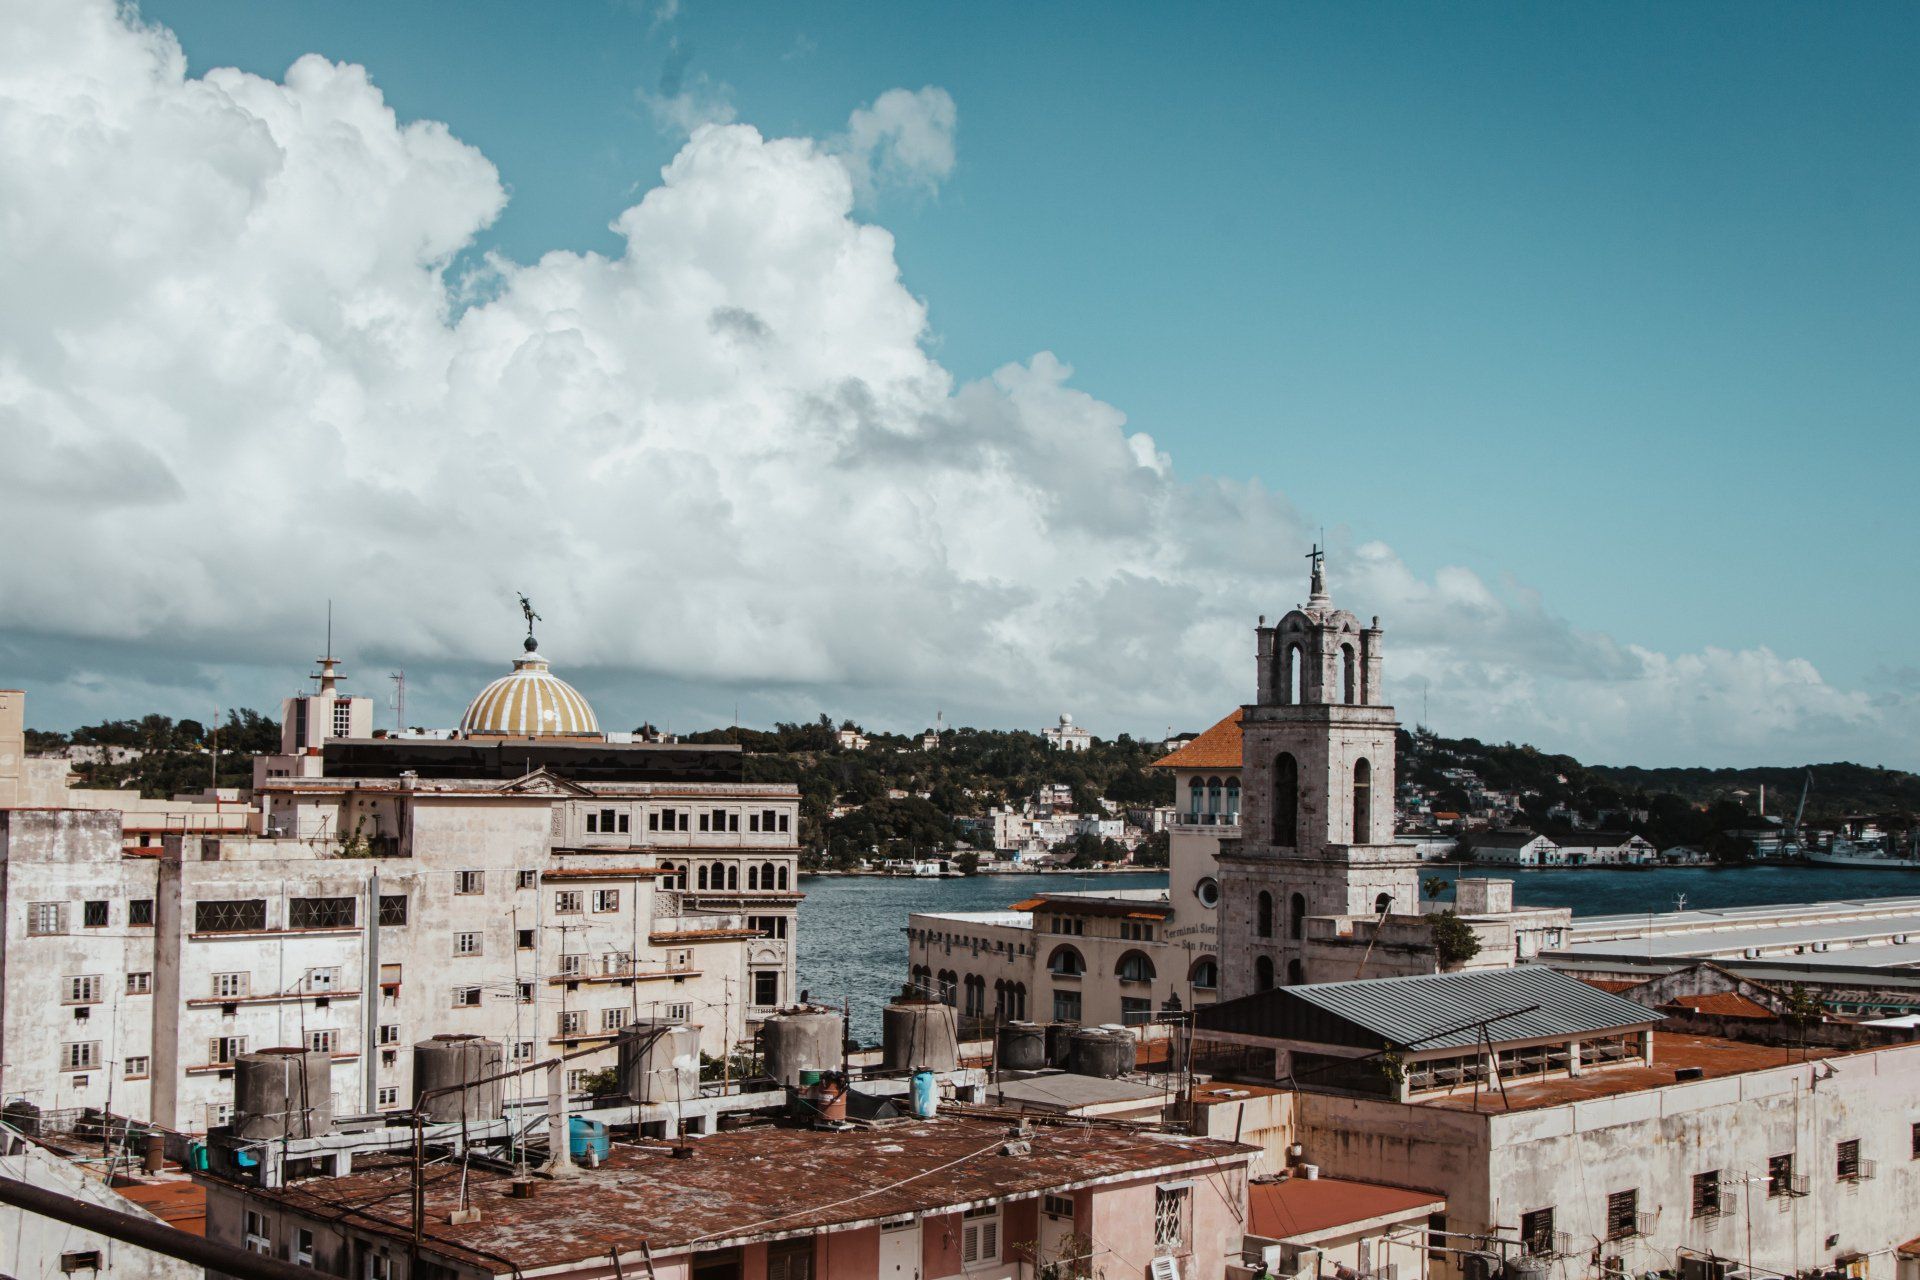 Aerial view of a Cuban city with white colonial buildings and thunderclouds in a blue sky. The city